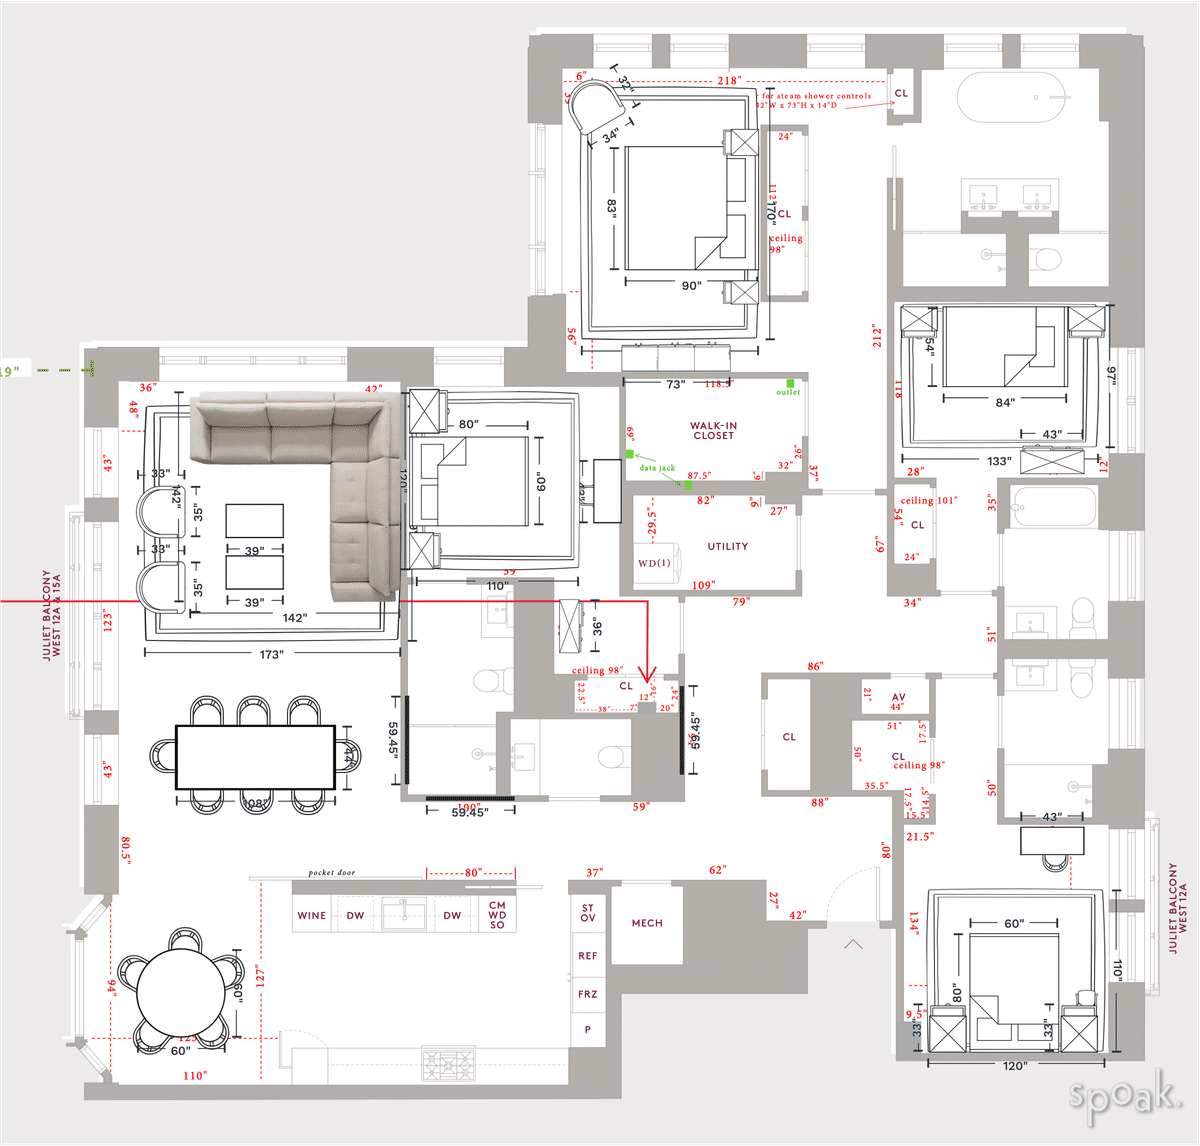 Apartment Plan designed by Christian Potter